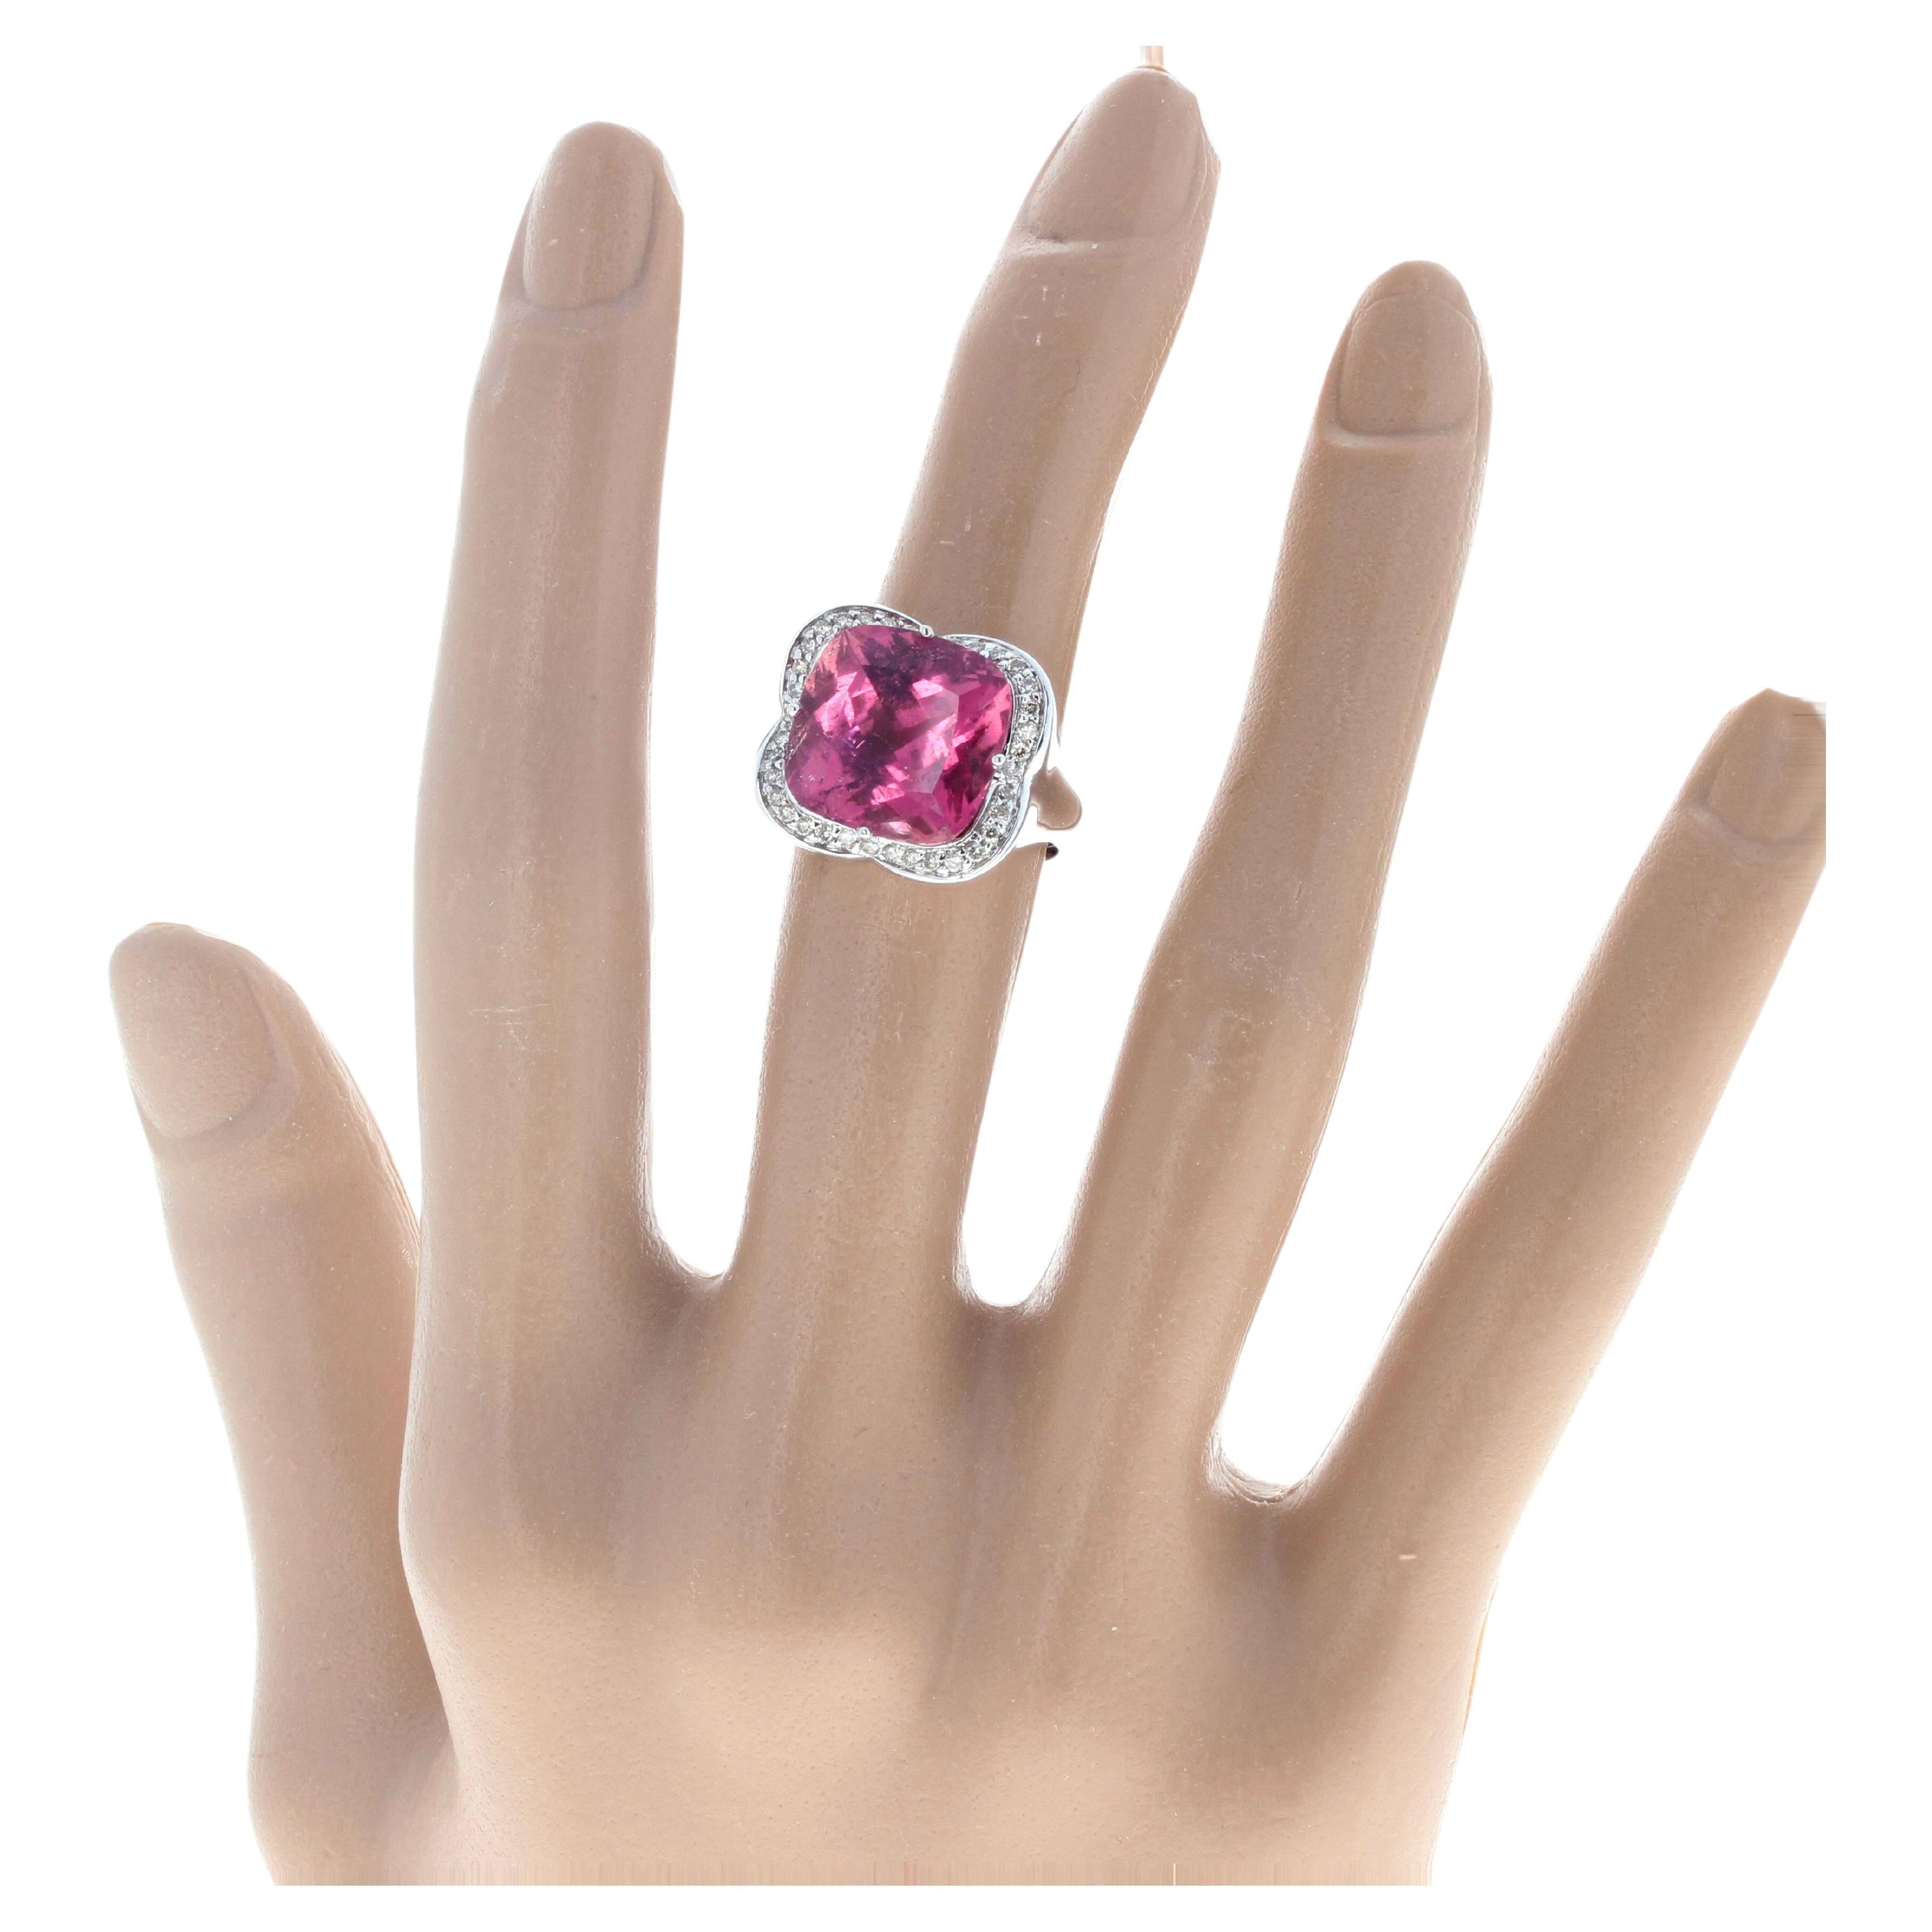 AJD Brilliant Clear Intense Pinkyred Natural 11.46 Ct Tourmaline & Diamonds Ring For Sale